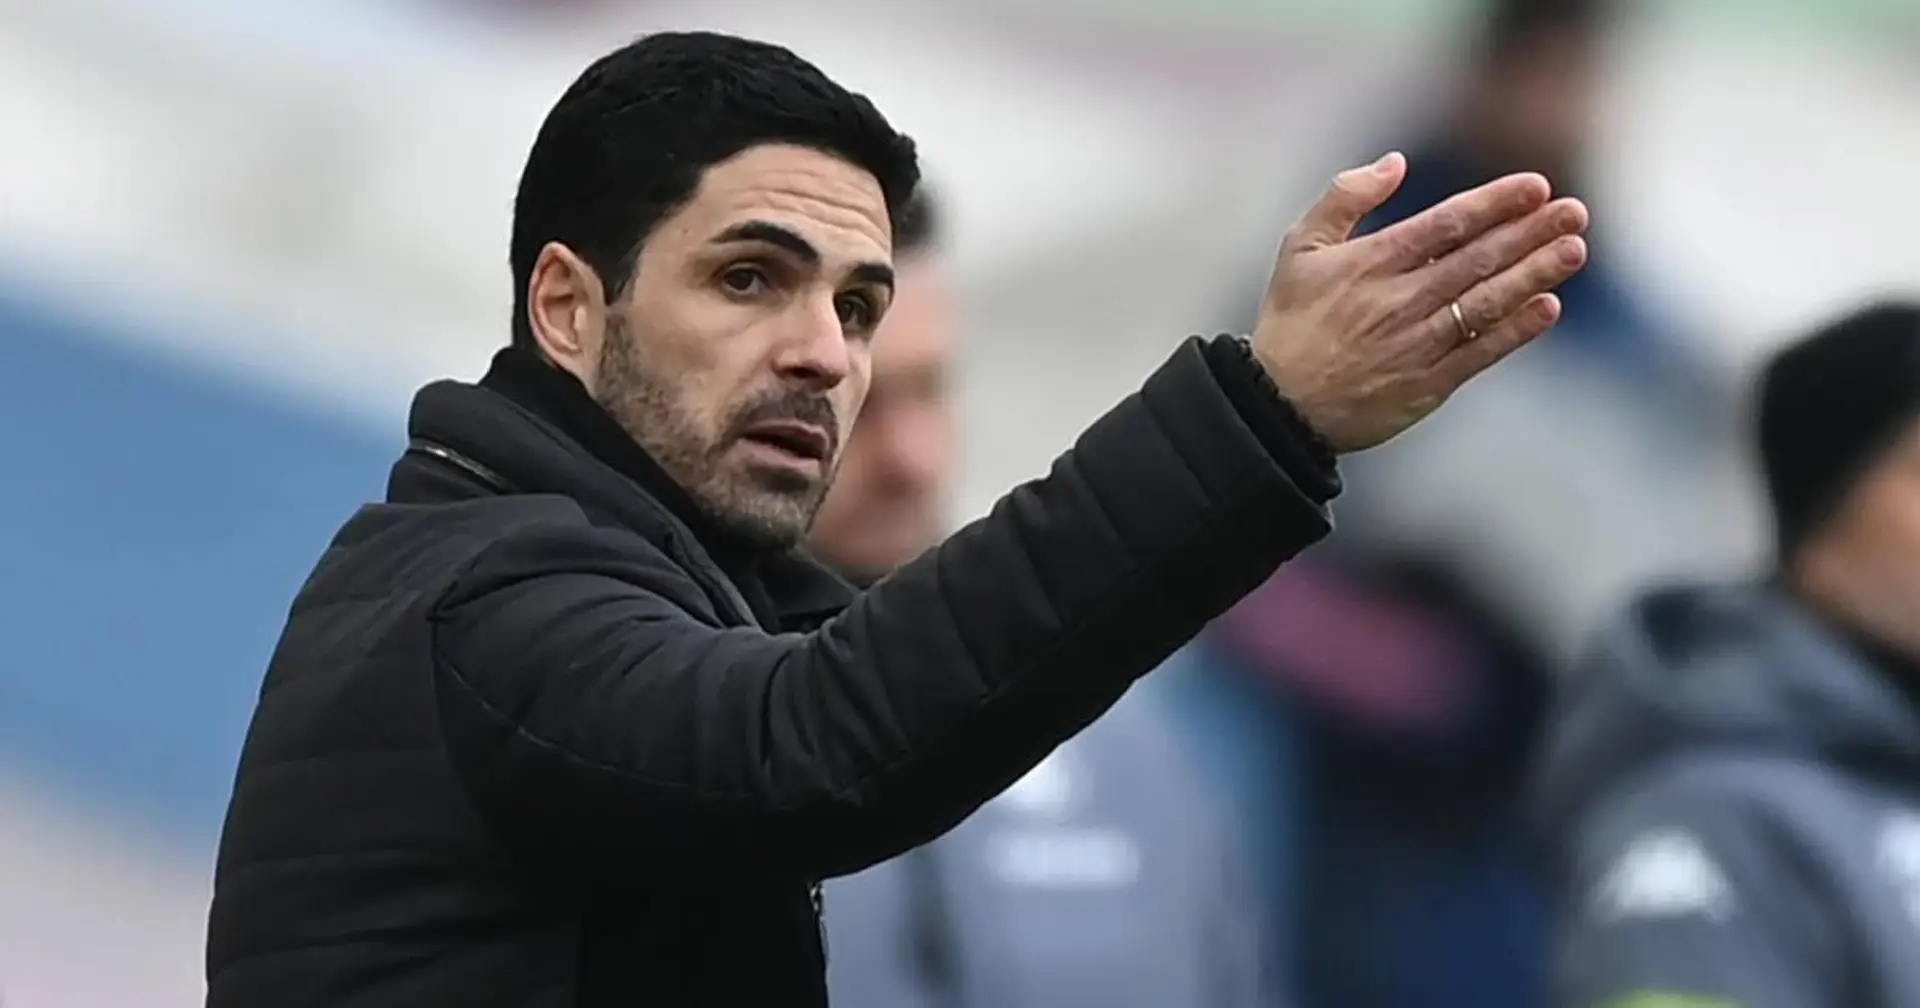 'It affects me much more when someone wants to hurt my family': Mikel Arteta on getting online abuse